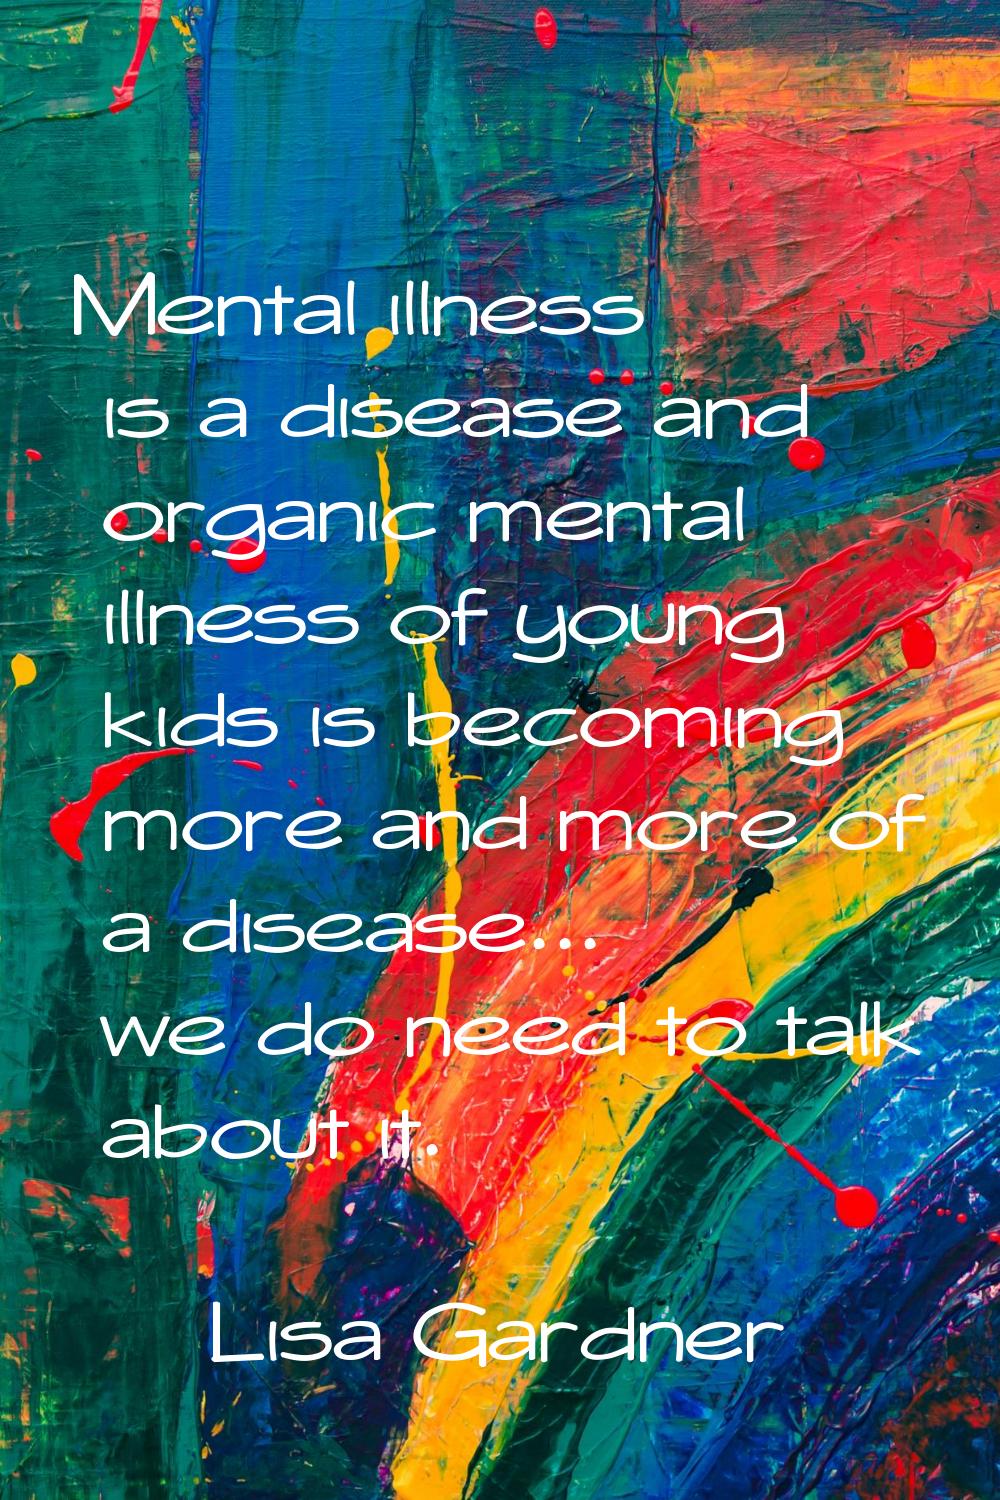 Mental illness is a disease and organic mental illness of young kids is becoming more and more of a